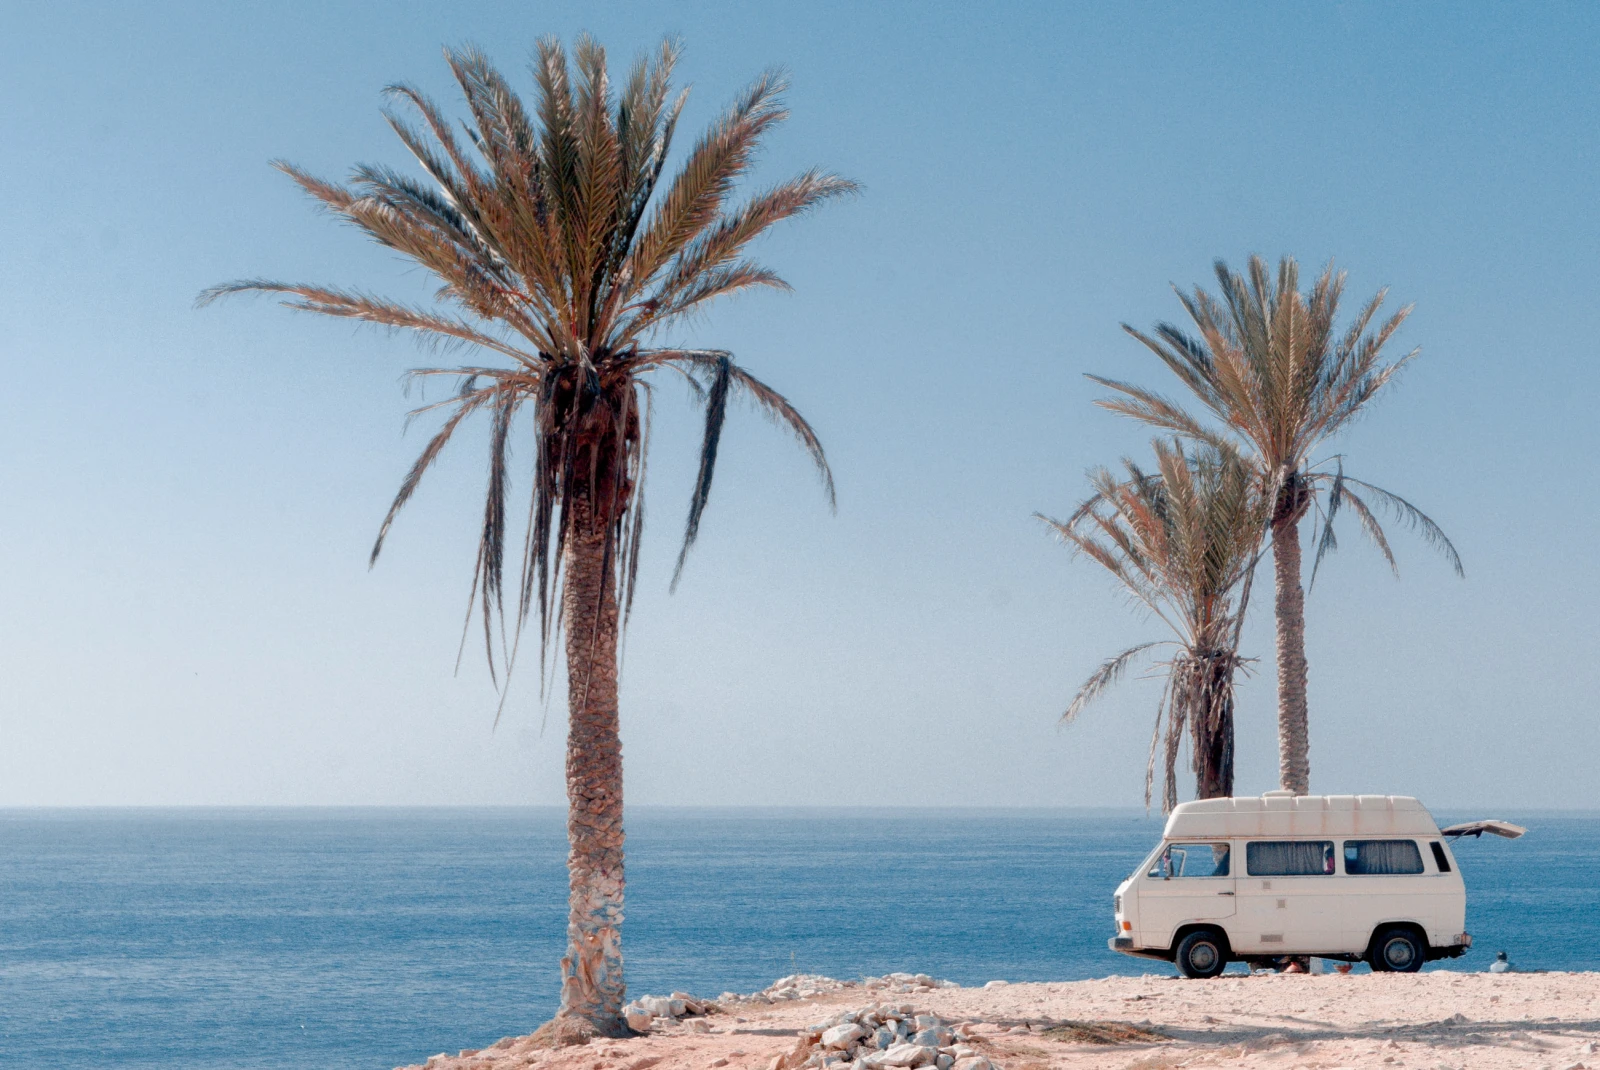 Camper van with open trunk parked along seaside cliff with palm trees in FL.